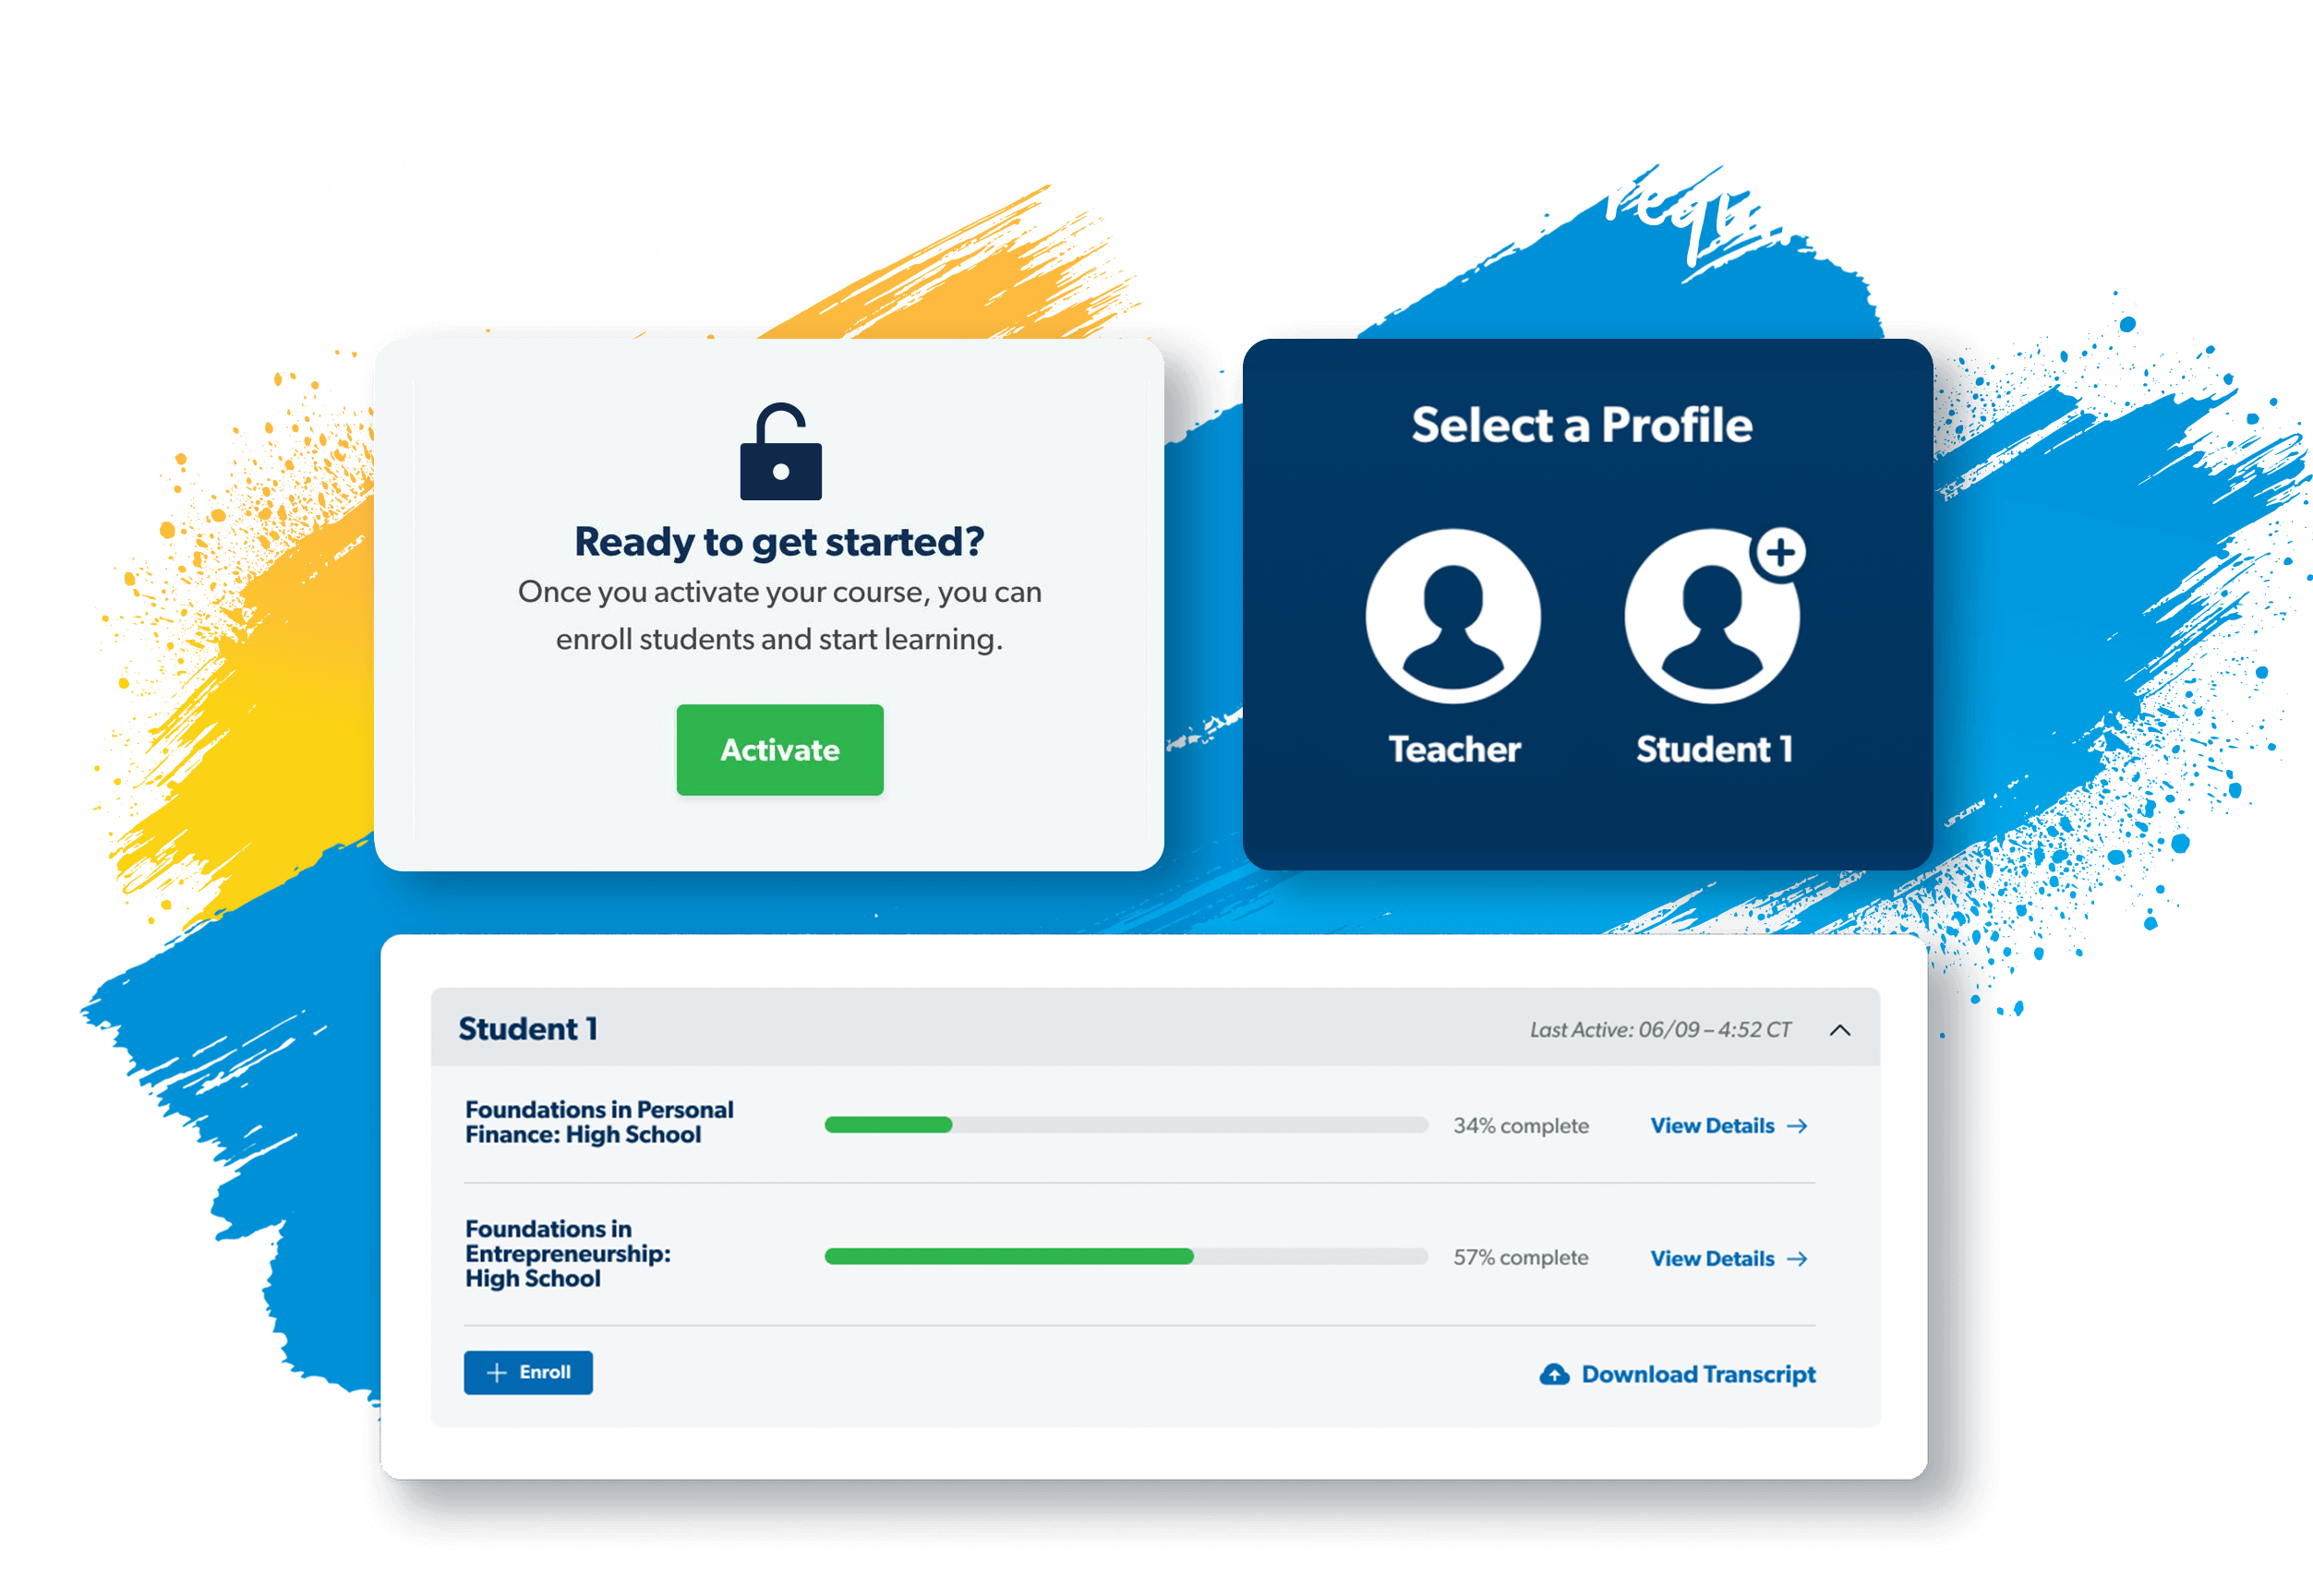 Easy to get started, no student email